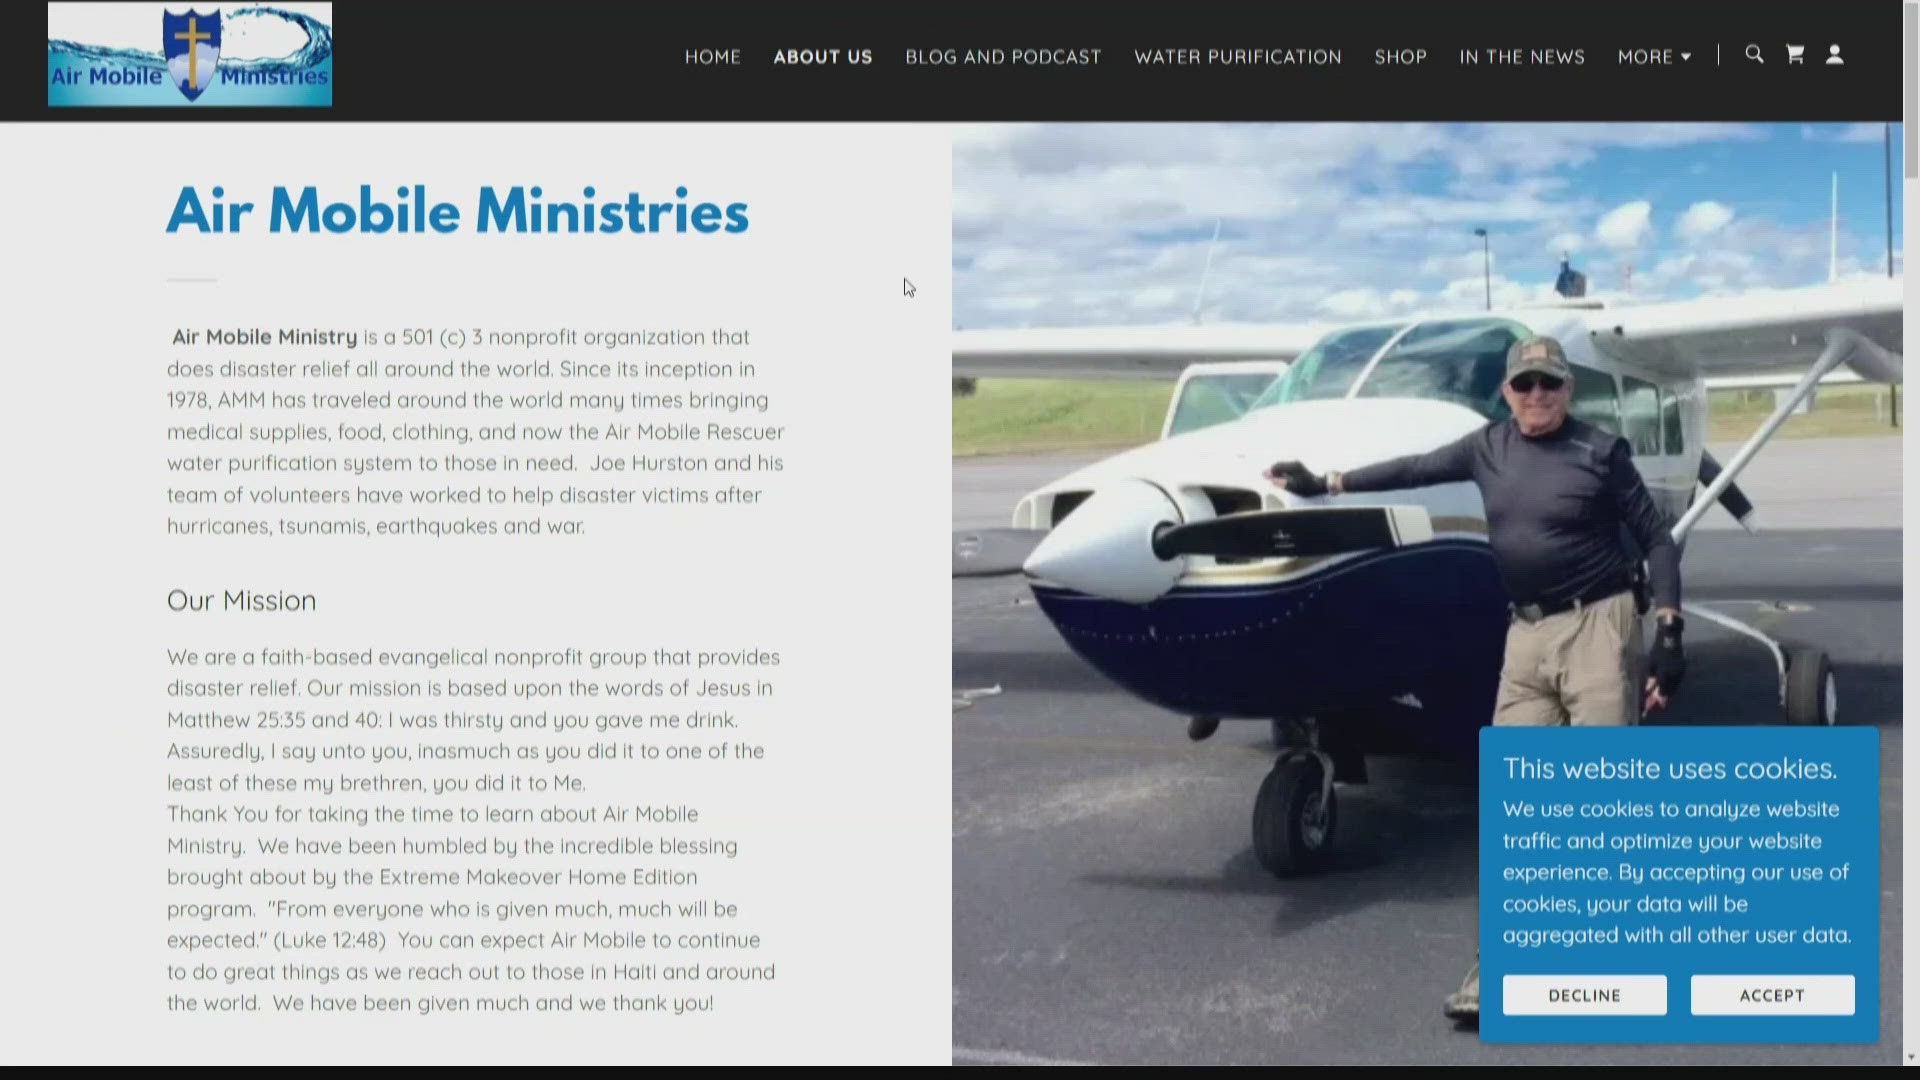 Joe Hurston founded Air Mobile Ministries in 1978 and since its start, he's traveled all over the world providing fresh, clean water to those in need.